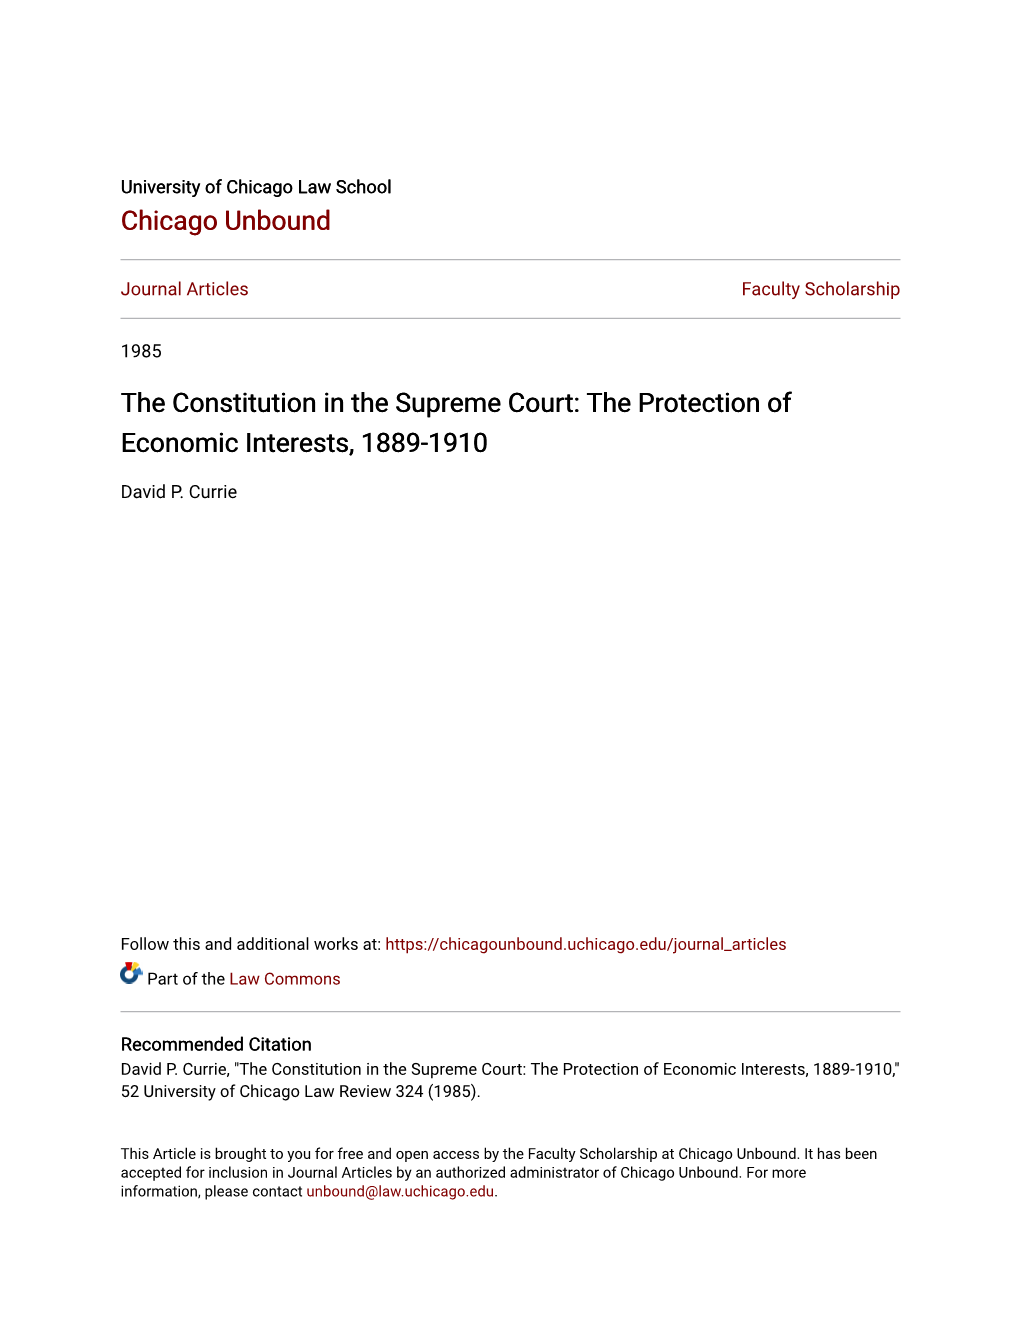 The Constitution in the Supreme Court: the Protection of Economic Interests, 1889-1910